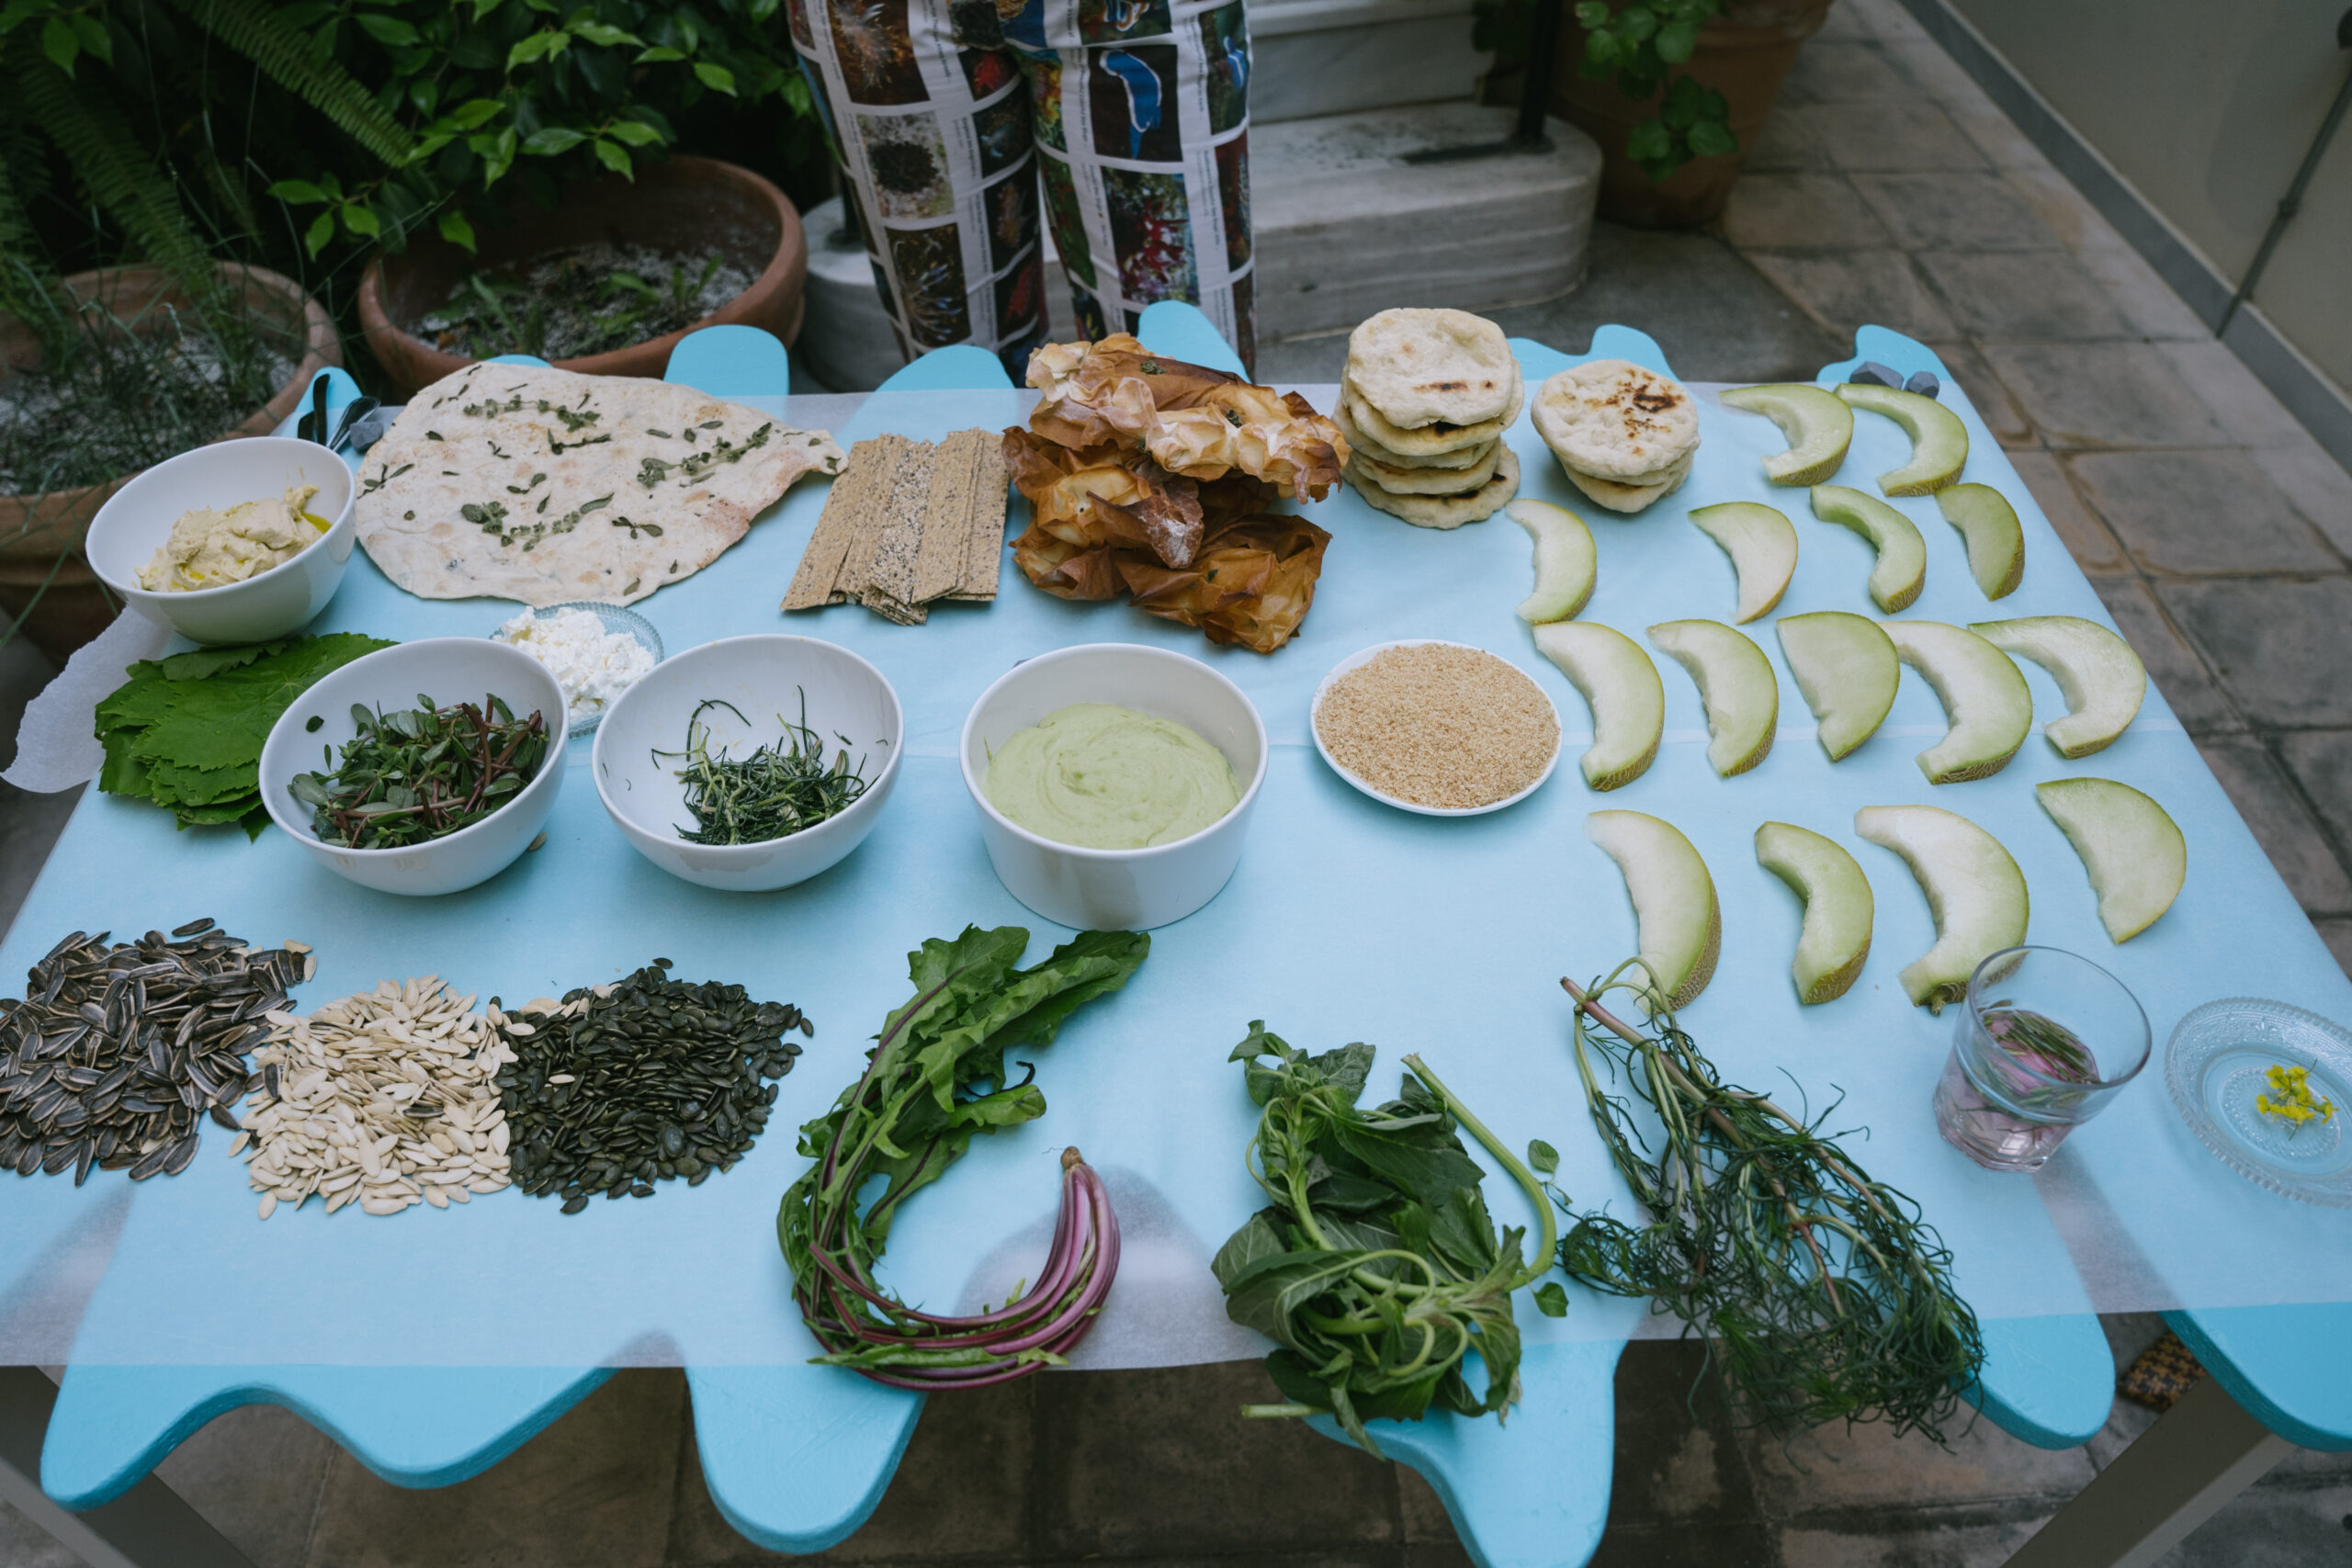 A blue wavy table features a crudite of halophytic plants and vegetables, dips, and round discs of bread.